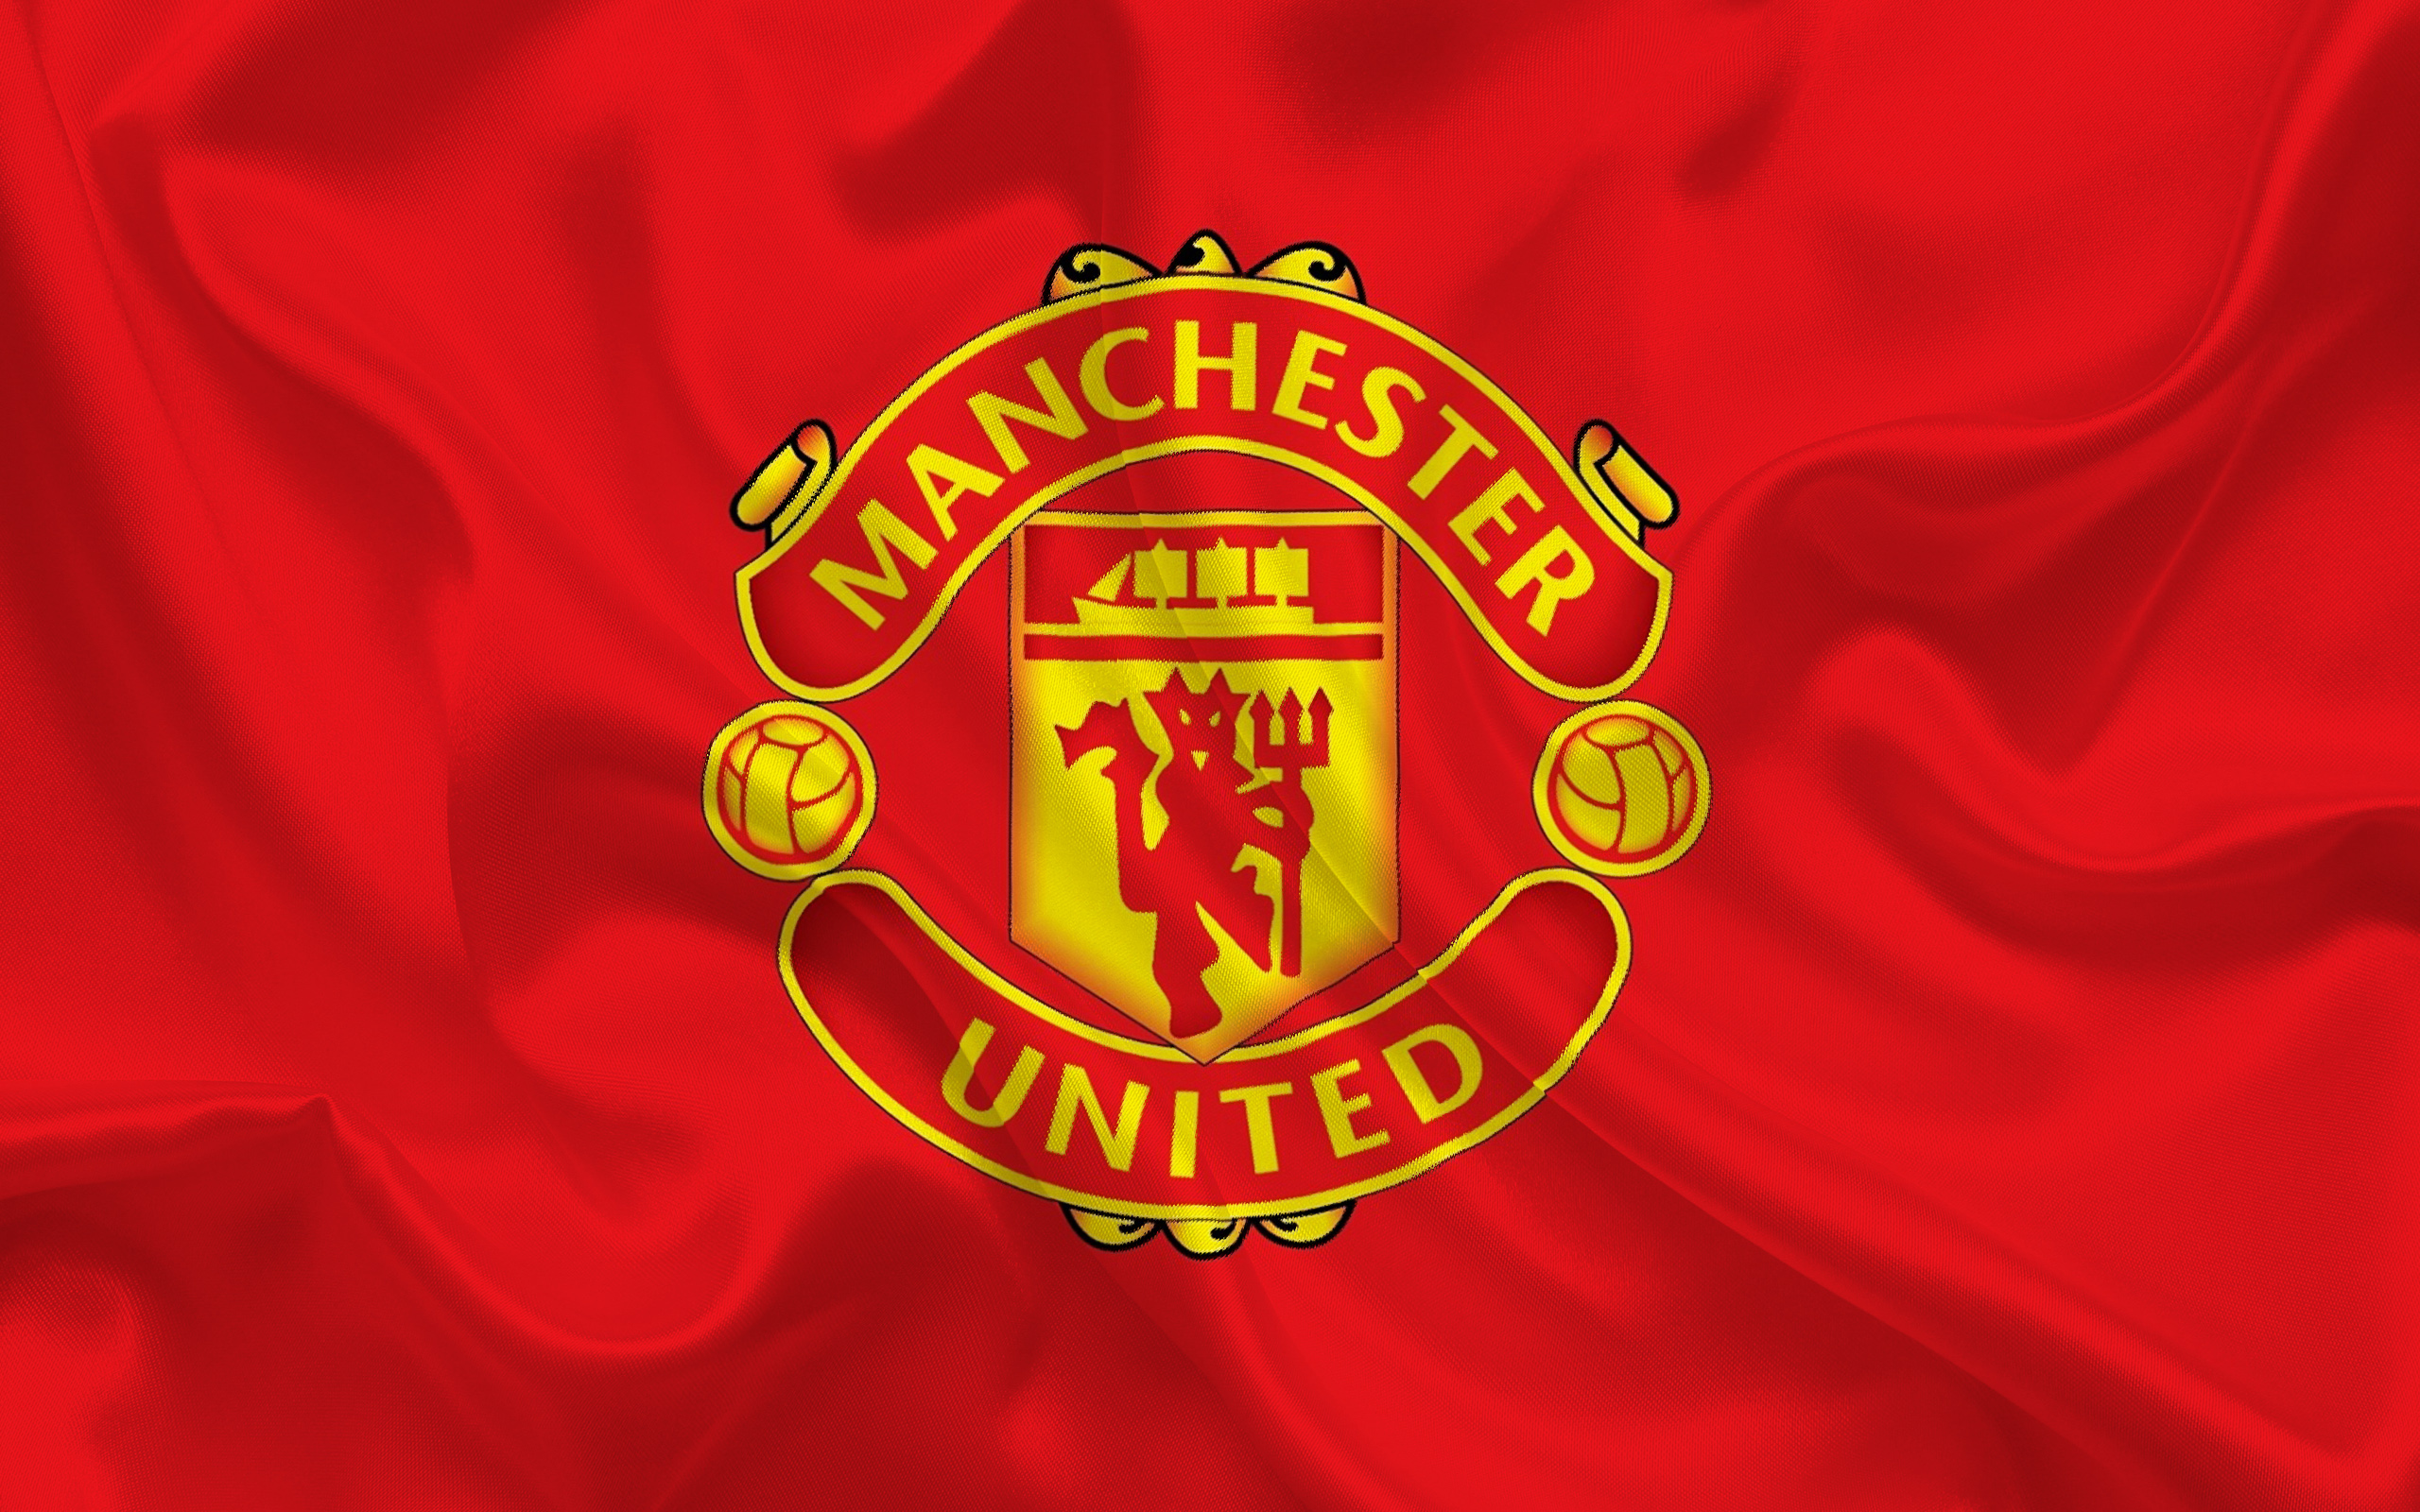 Download wallpaper Manchester United, flag, football club, MU, Premier League, England, Manchester United emblem for desktop with resolution 2560x1600. High Quality HD picture wallpaper